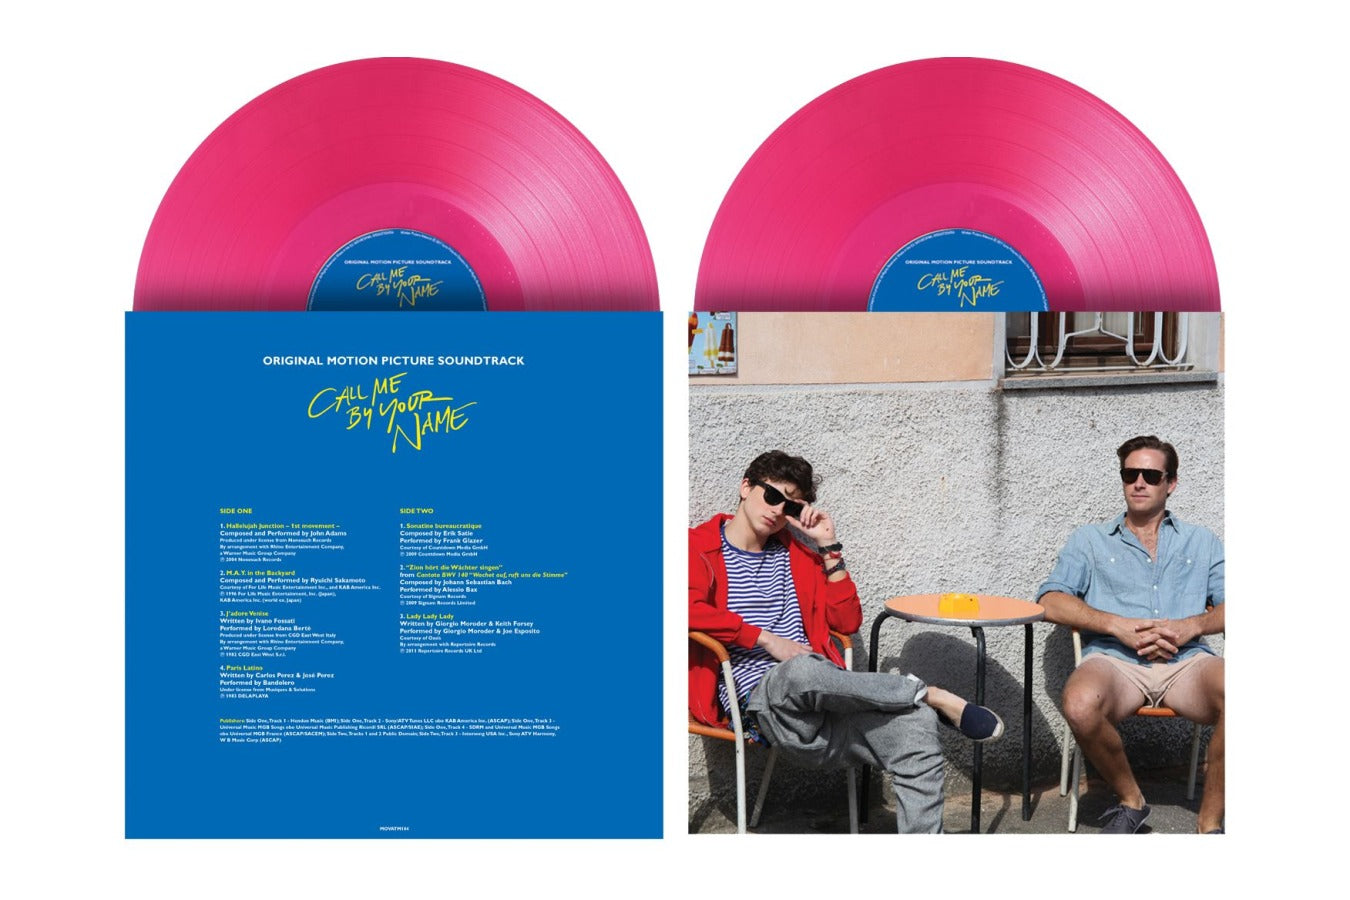 Call Me By Your Name (Original Motion Picture Soundtrack)